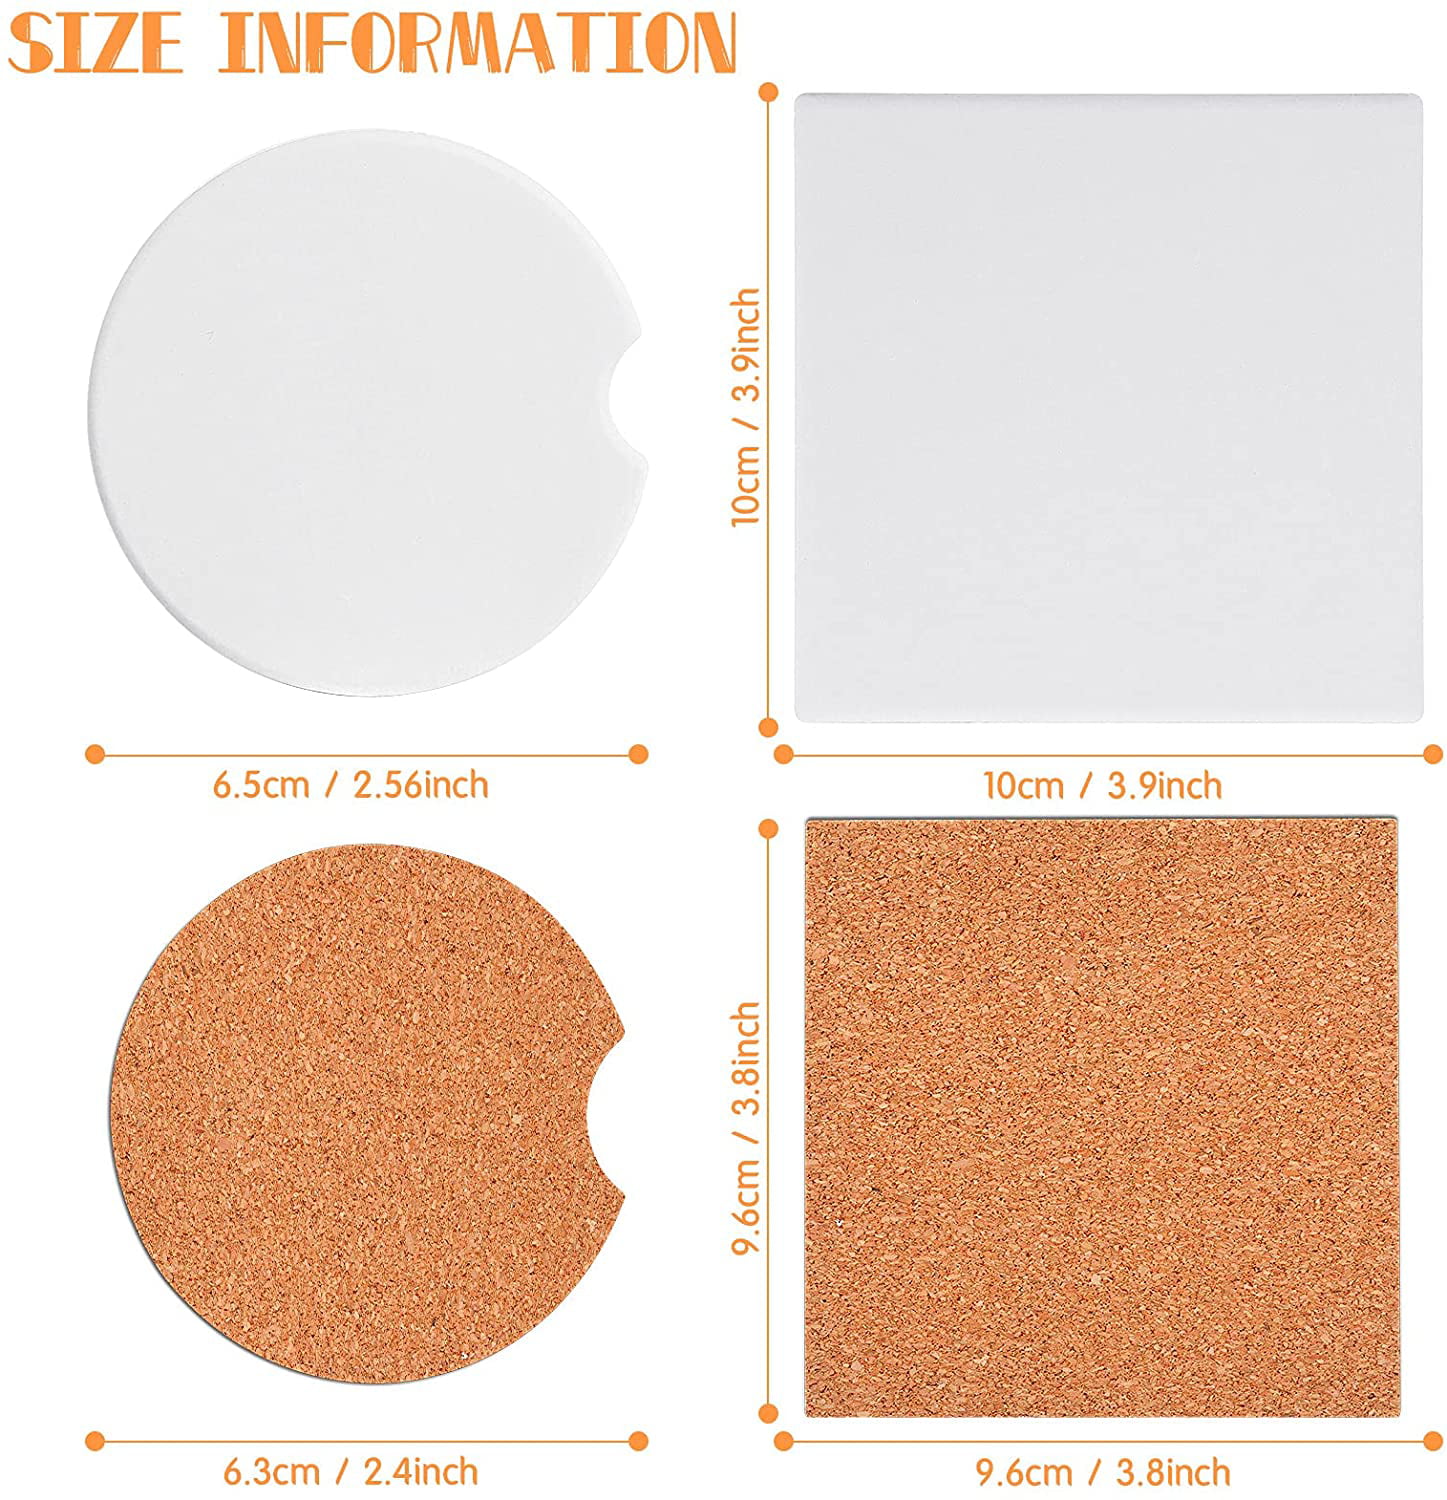 12 Pieces Ceramic Tiles for Crafts Coasters Include 2.6 Inch Round Unglazed White Tiles 4 Inch Square Ceramic Coasters Blank Car Coasters with 12 Cork Backing Pads for Ink or Acrylic Pouring 